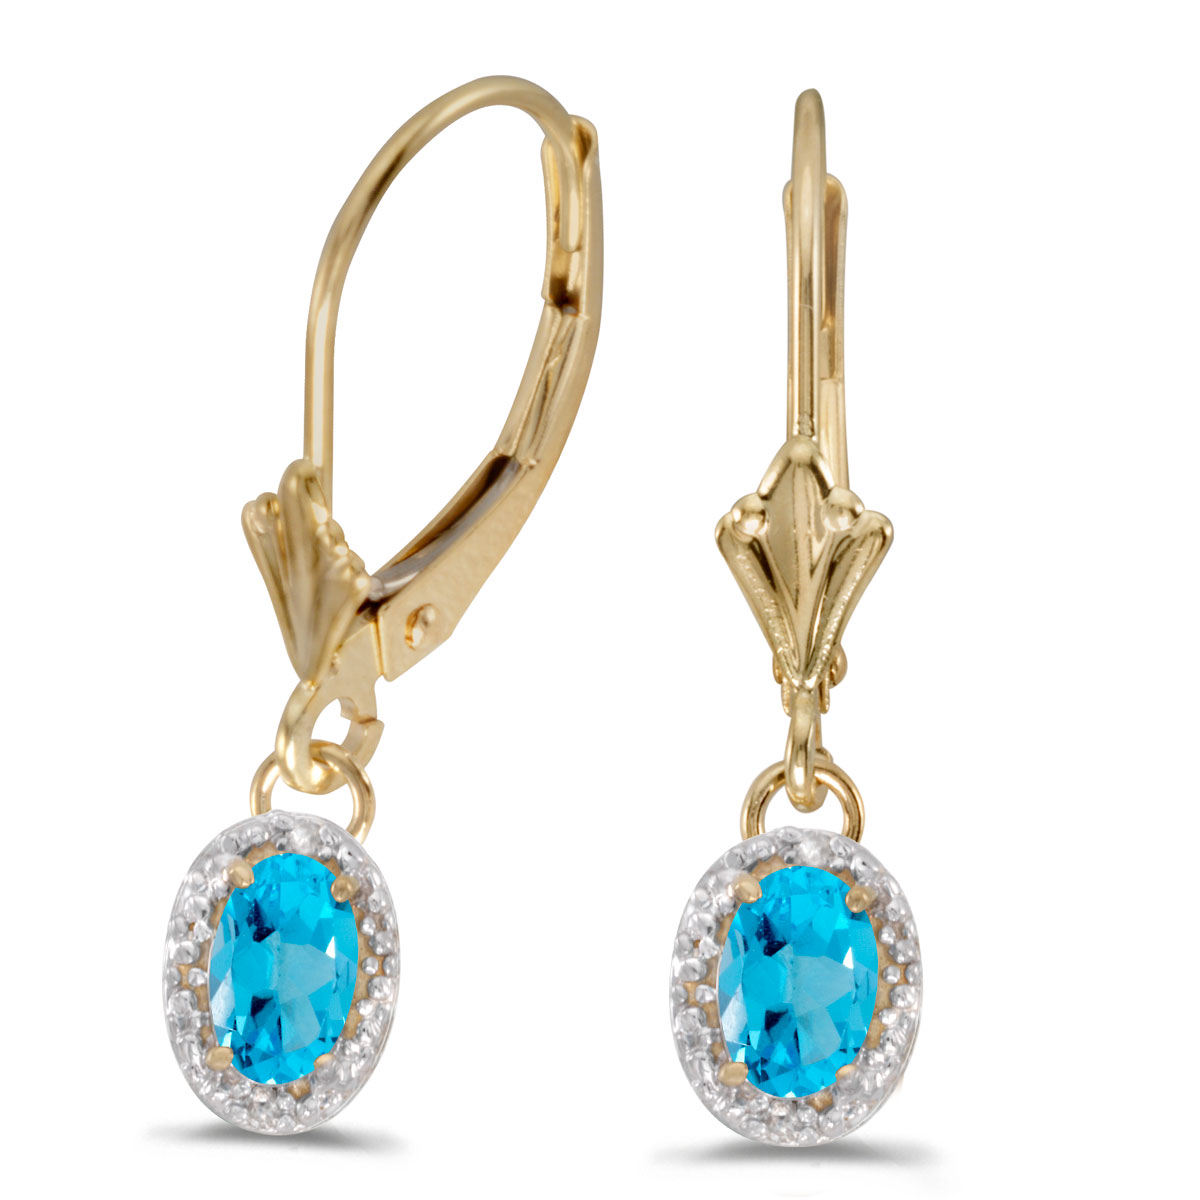 JCX2119: Beautiful 10k yellow gold leverback earrings with sophisticated 6x4 mm blue topaz stones complemented with bright diamonds.